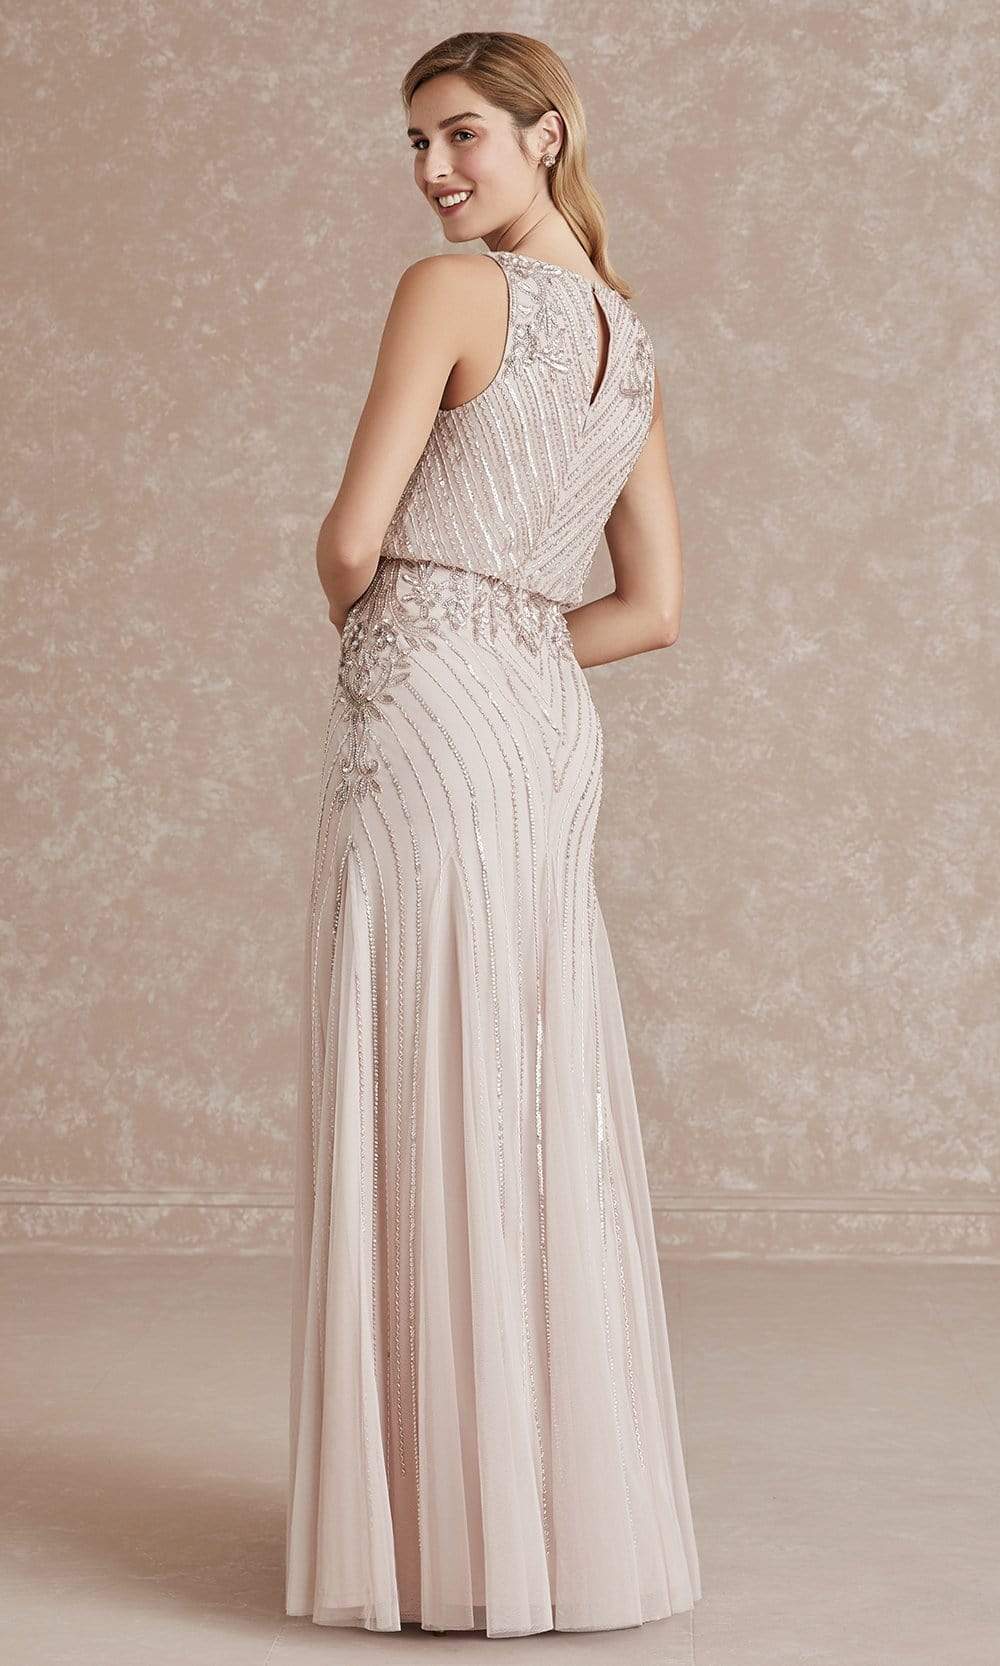 Adrianna Papell Evening - Sleeveless Blouson Bead Embellished Dress 40280SC In Pink